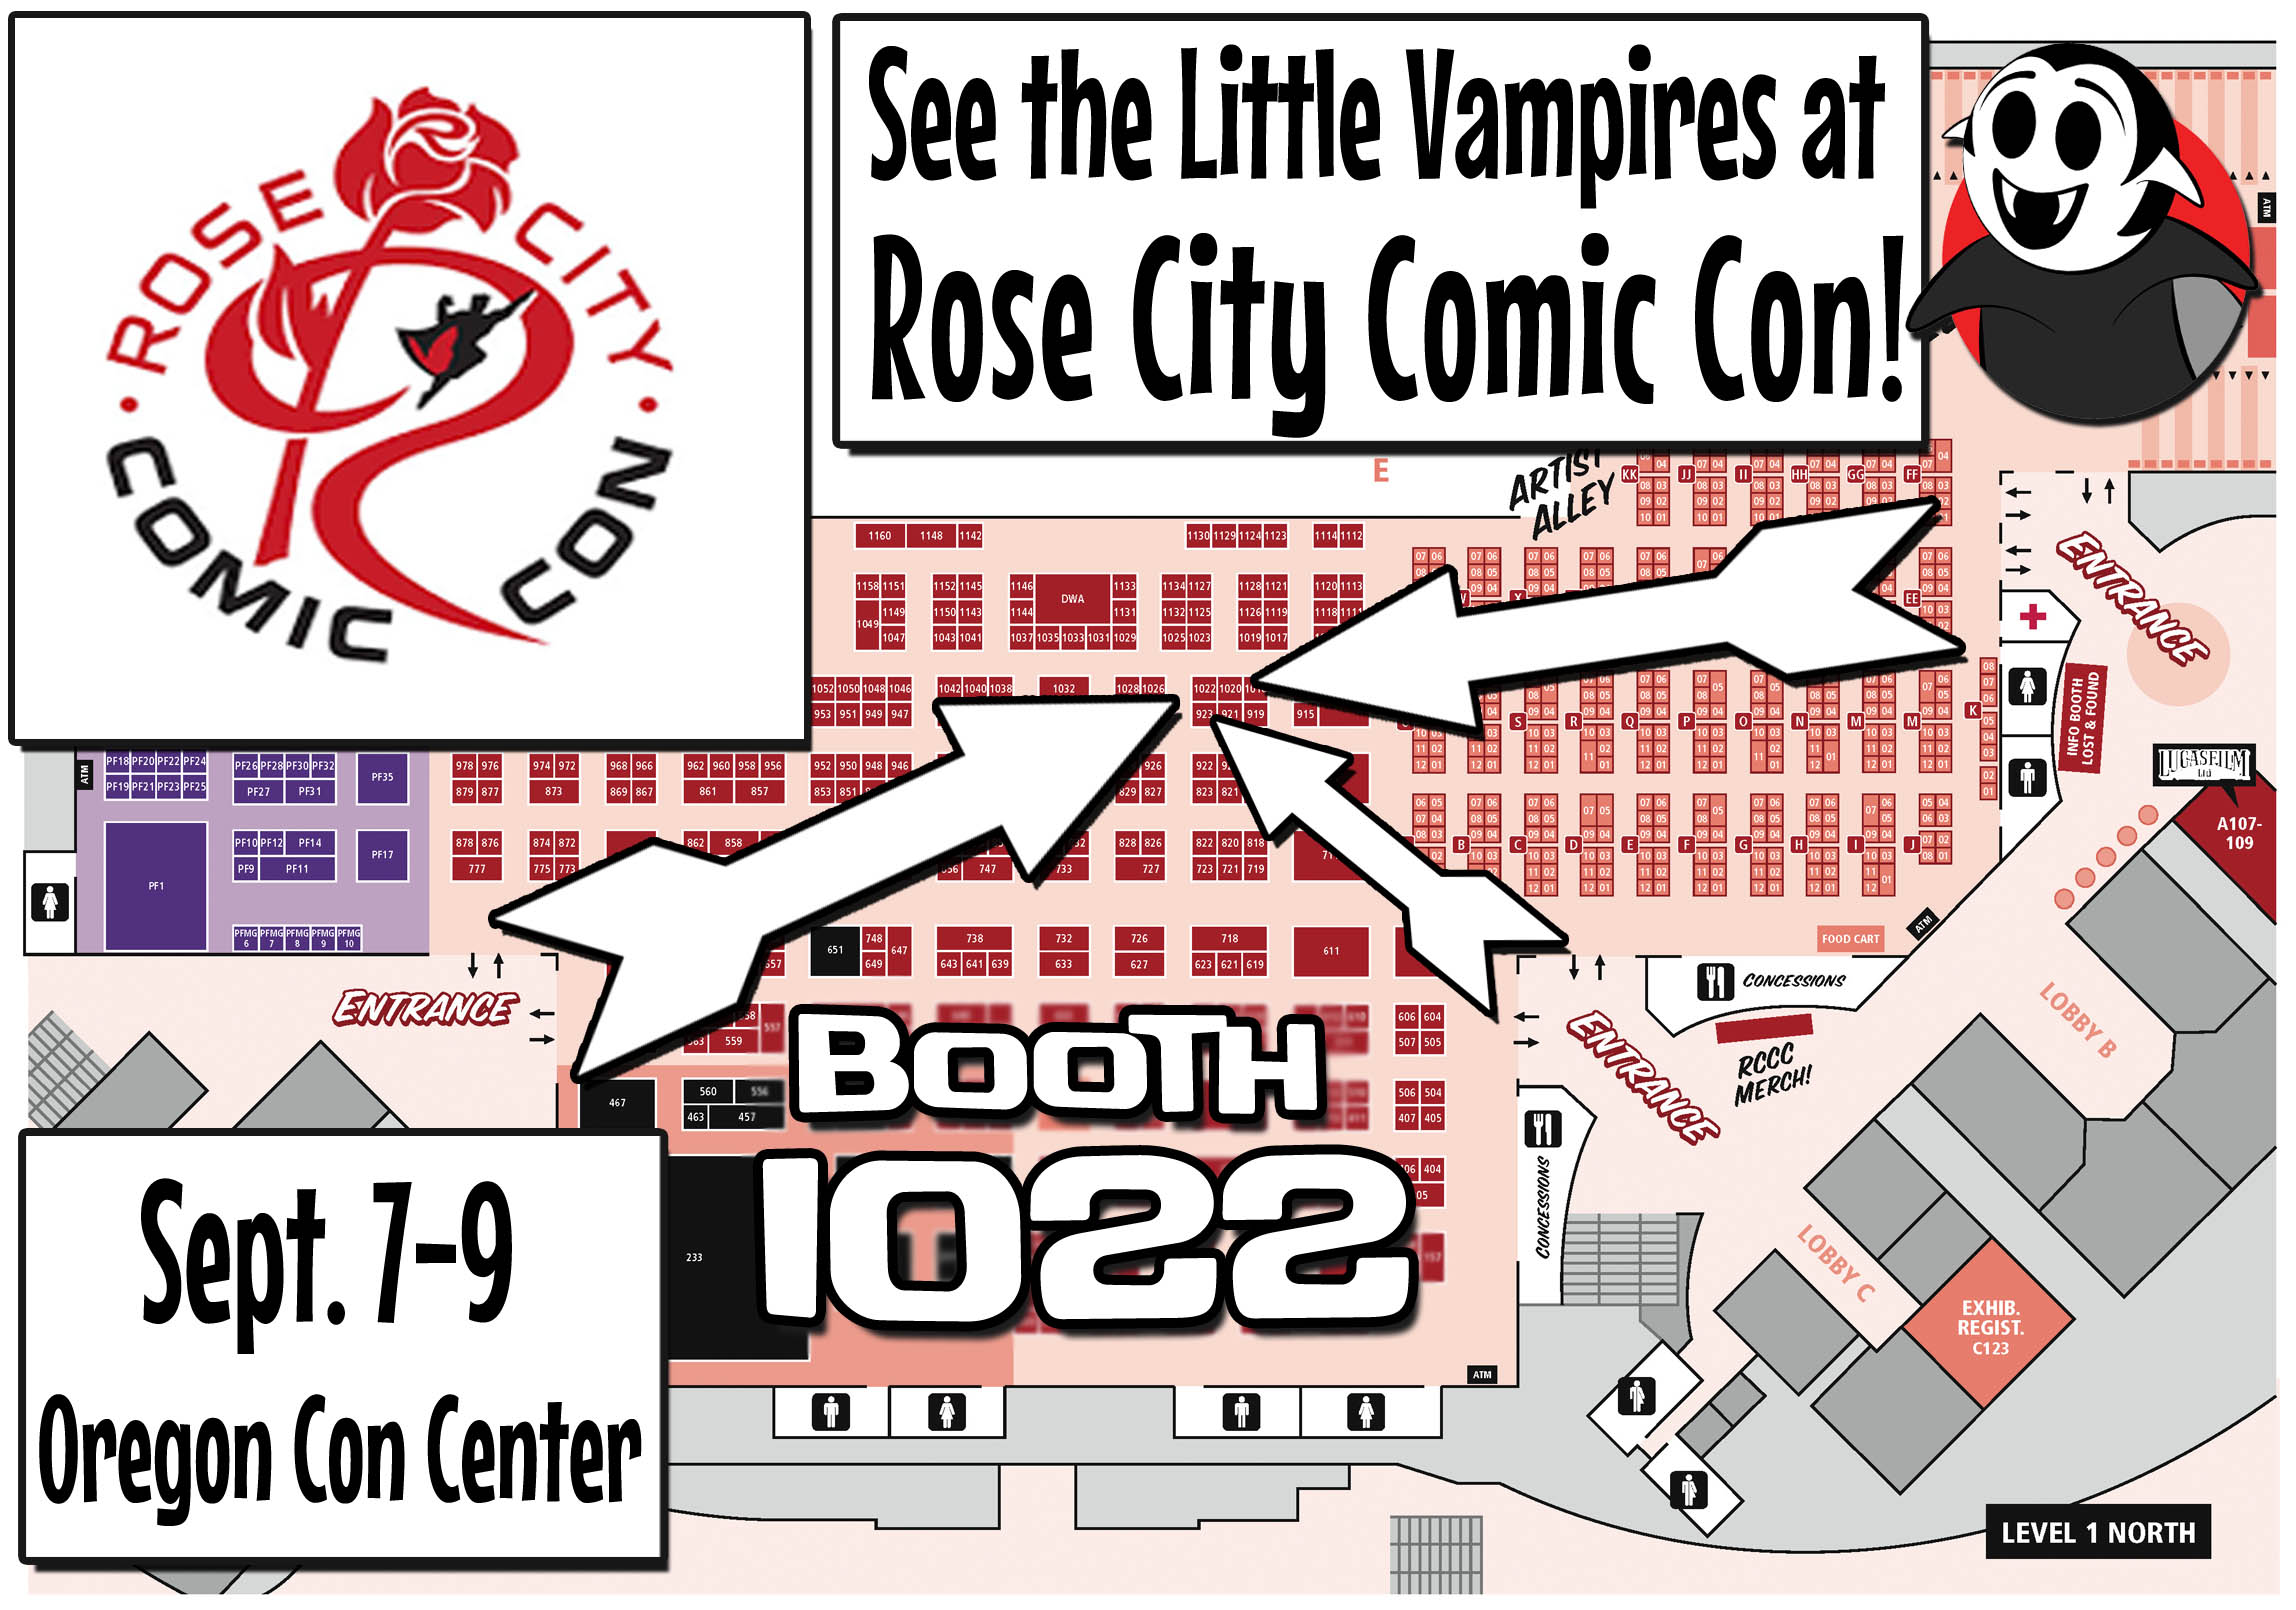 Rose City Comic Con 2018 exhibitor floor map with the Little Vampires booth highlighted